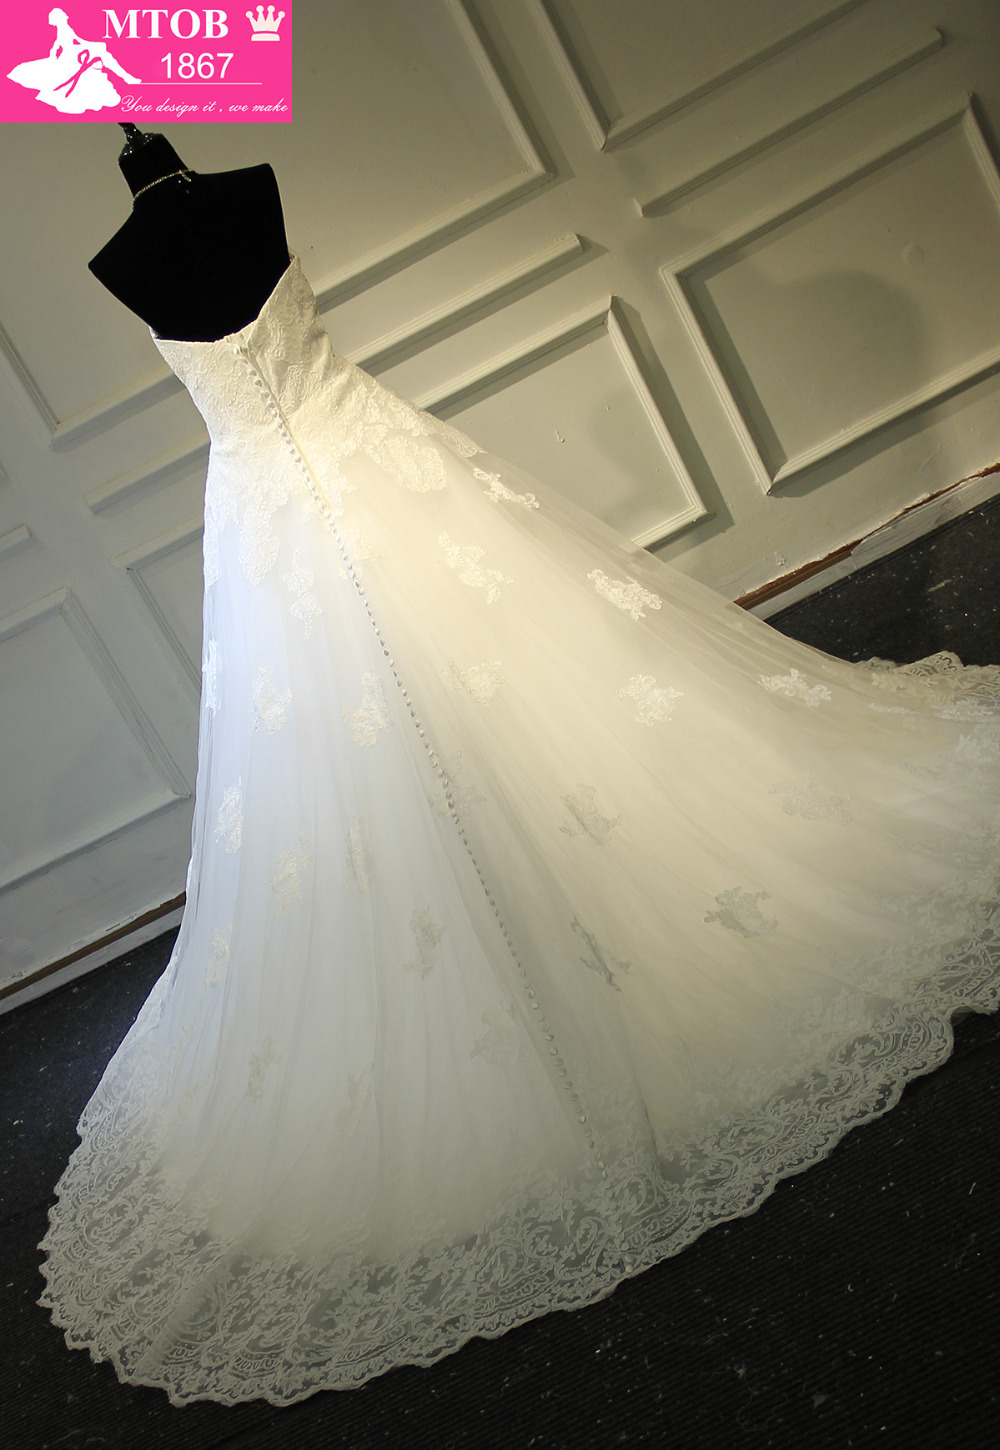 Click to enlarge Strapless Lace Vintage Wedding Dress Bridal Gowns